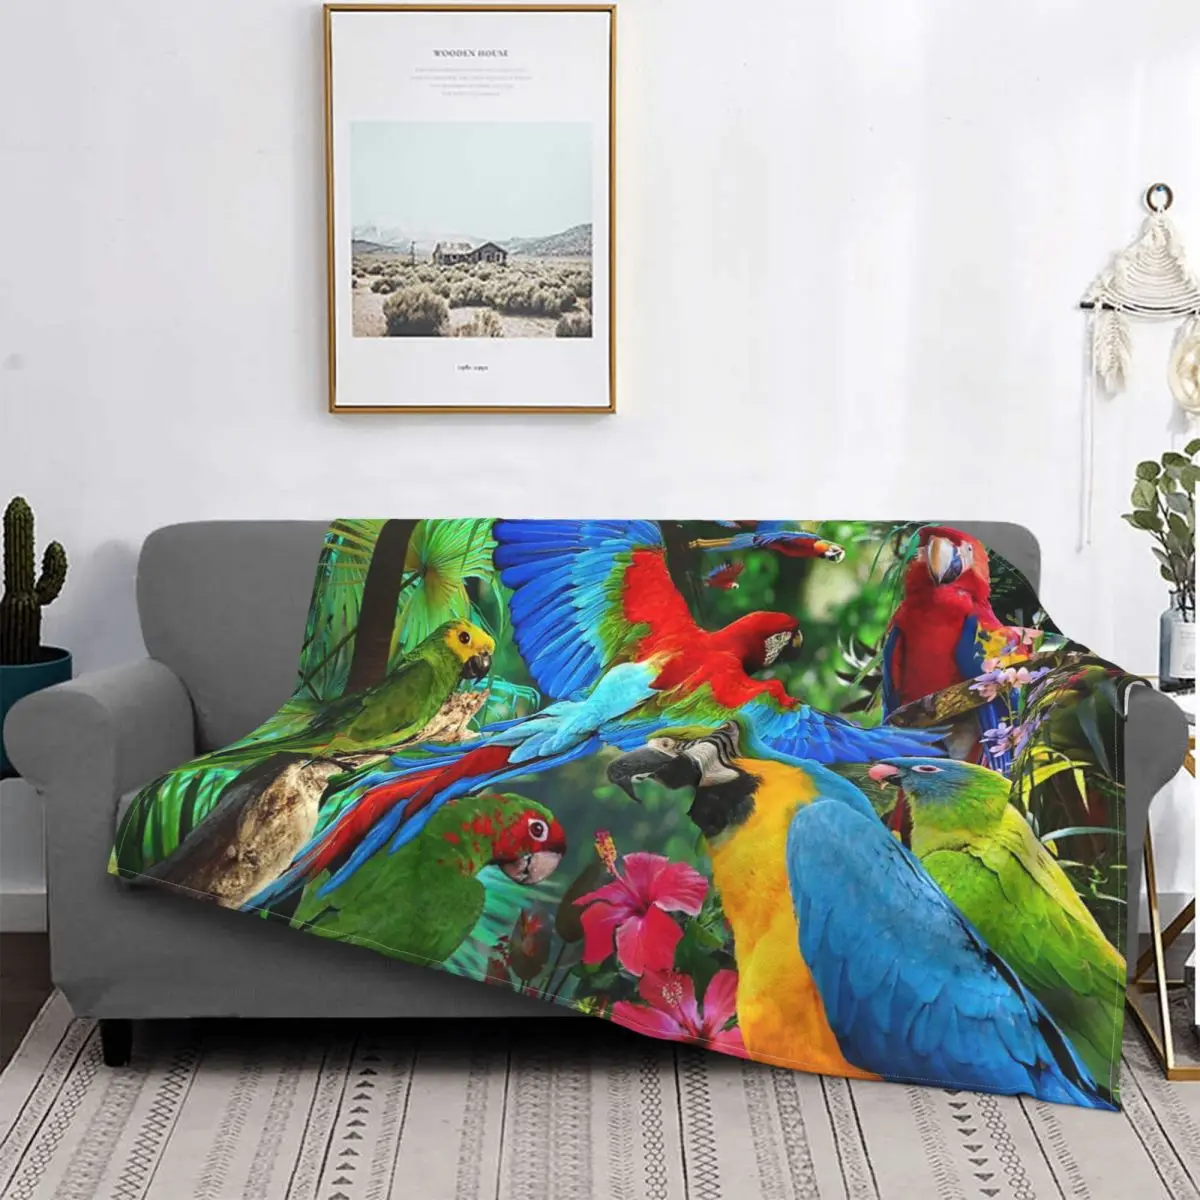 

Parrots Throw Blanket Warm Soft Cozy Plush Throw Fleece Flannel Blanket Magical Birds Parrot Suitable for All Living Rooms Bed